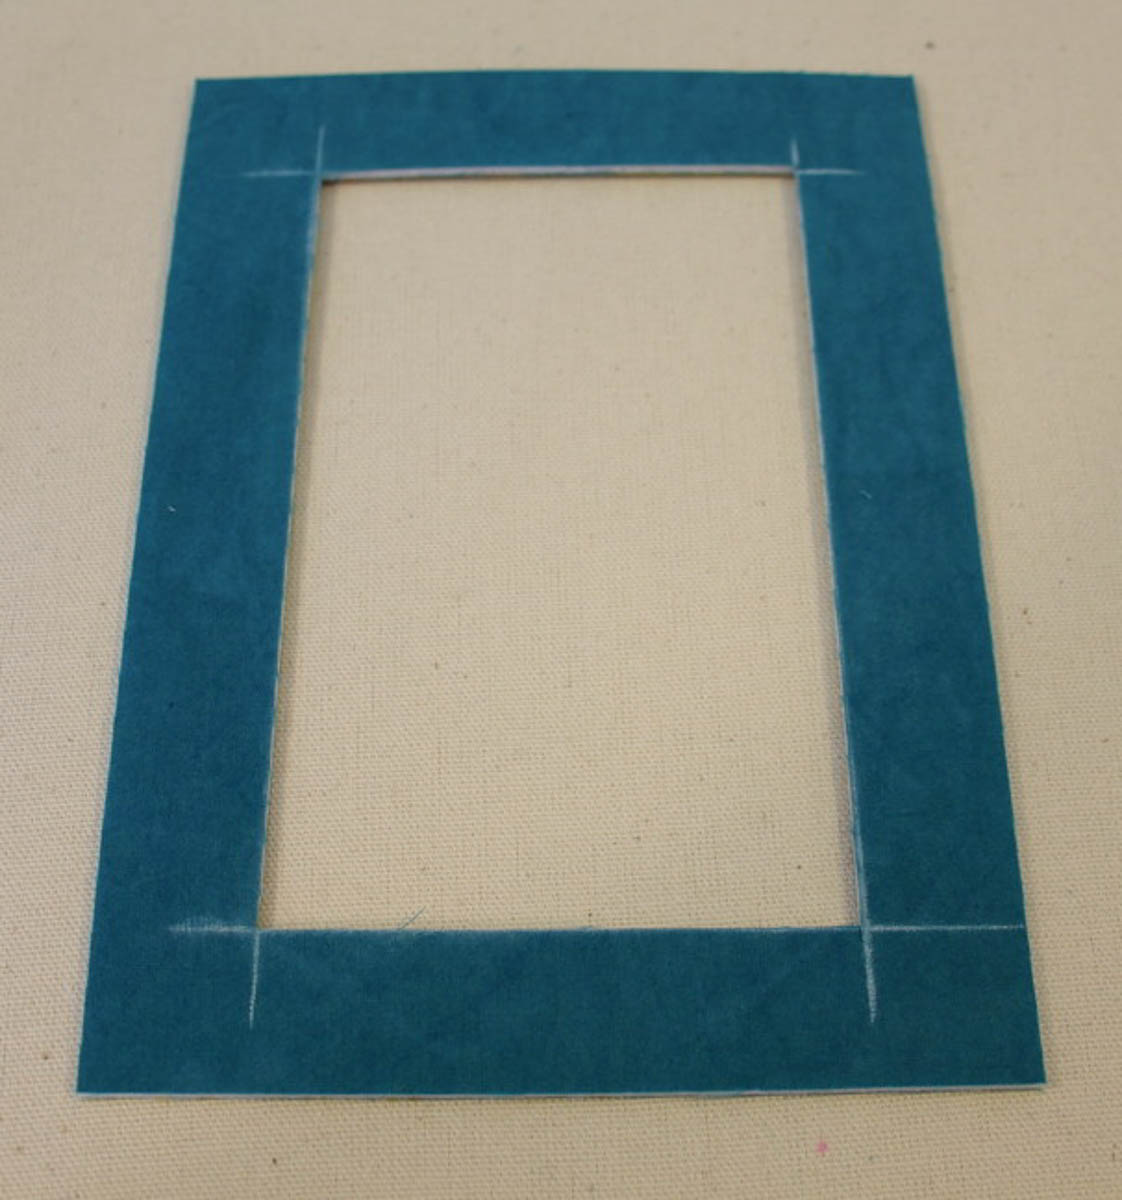 Fabric Frame Sewing Tutorial - cutting the frame panel